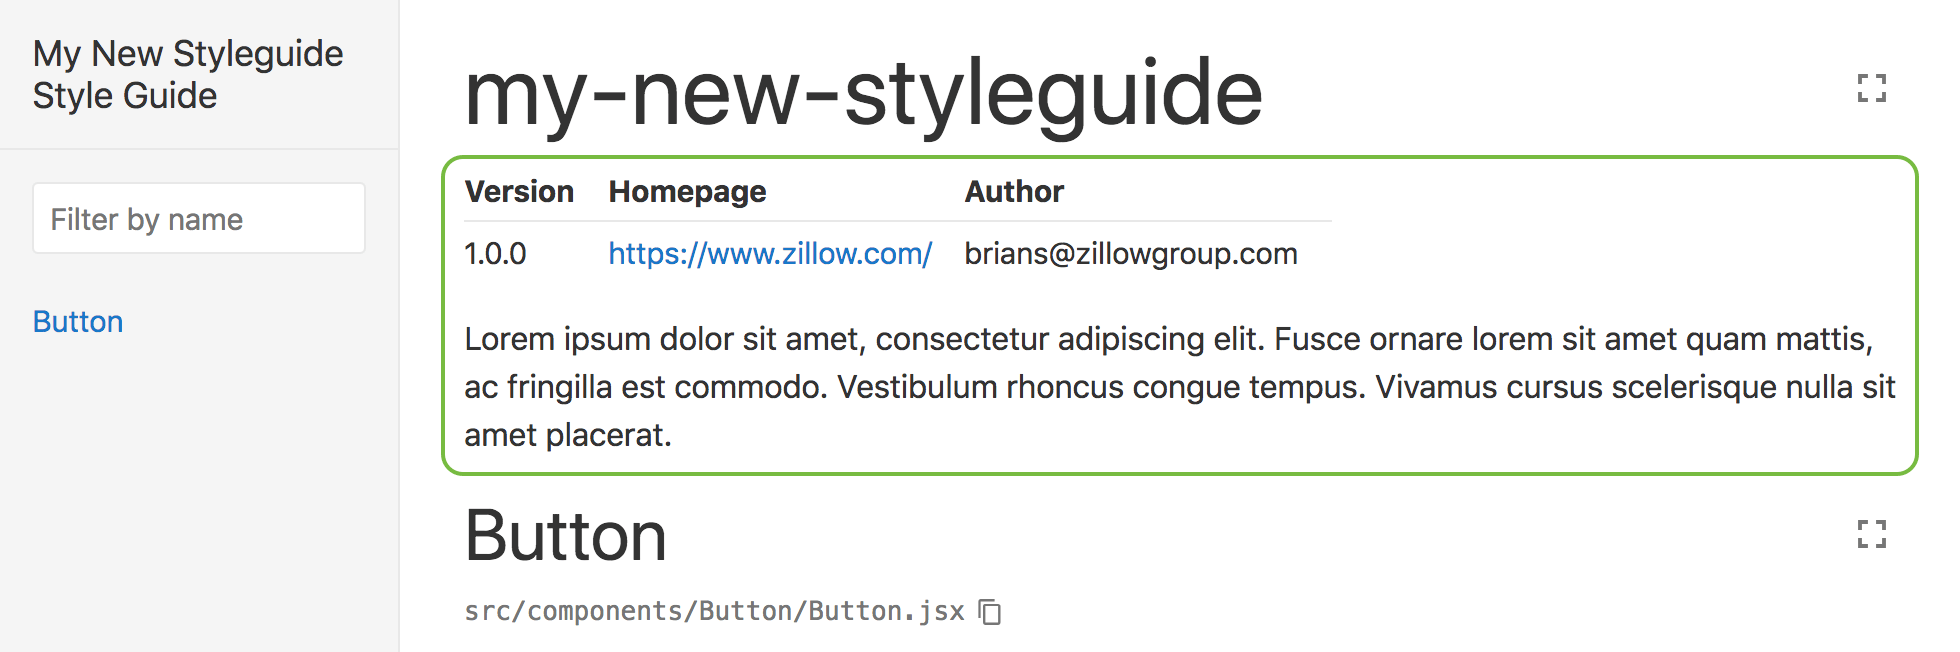 Customized style guide